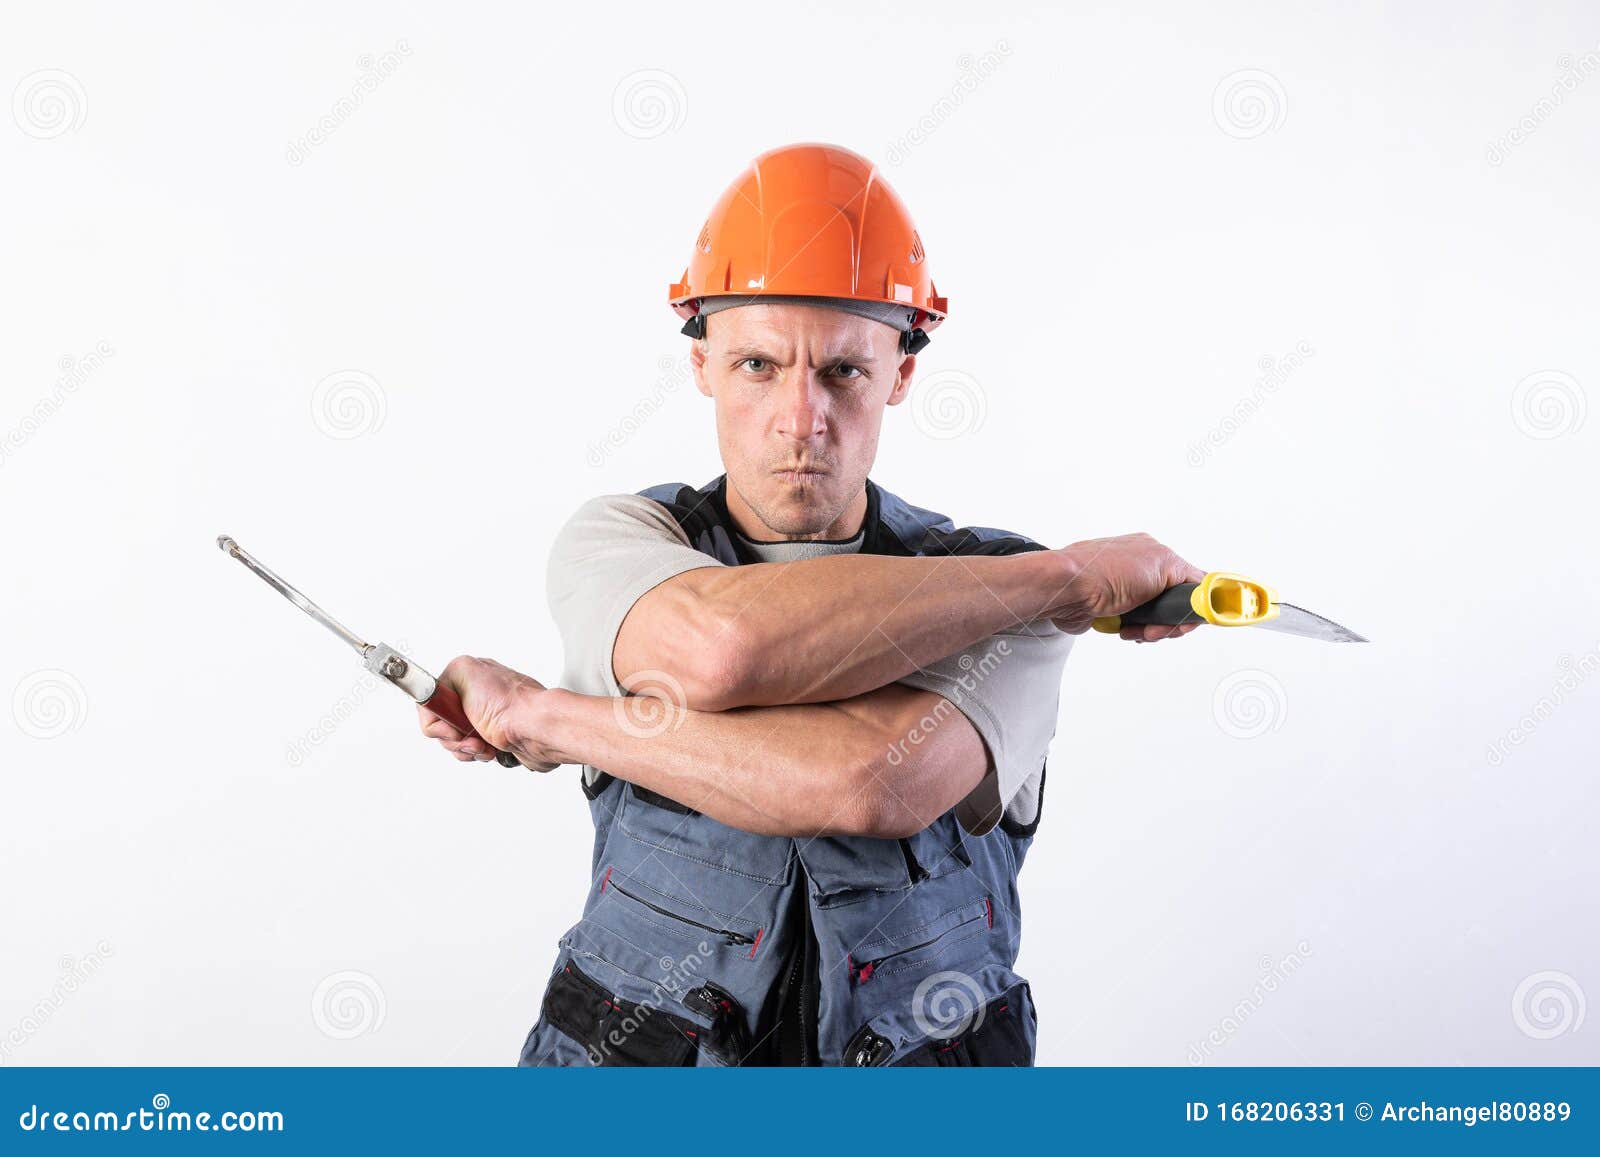 a builder with hacksaws in a helmet mocks. on a light background